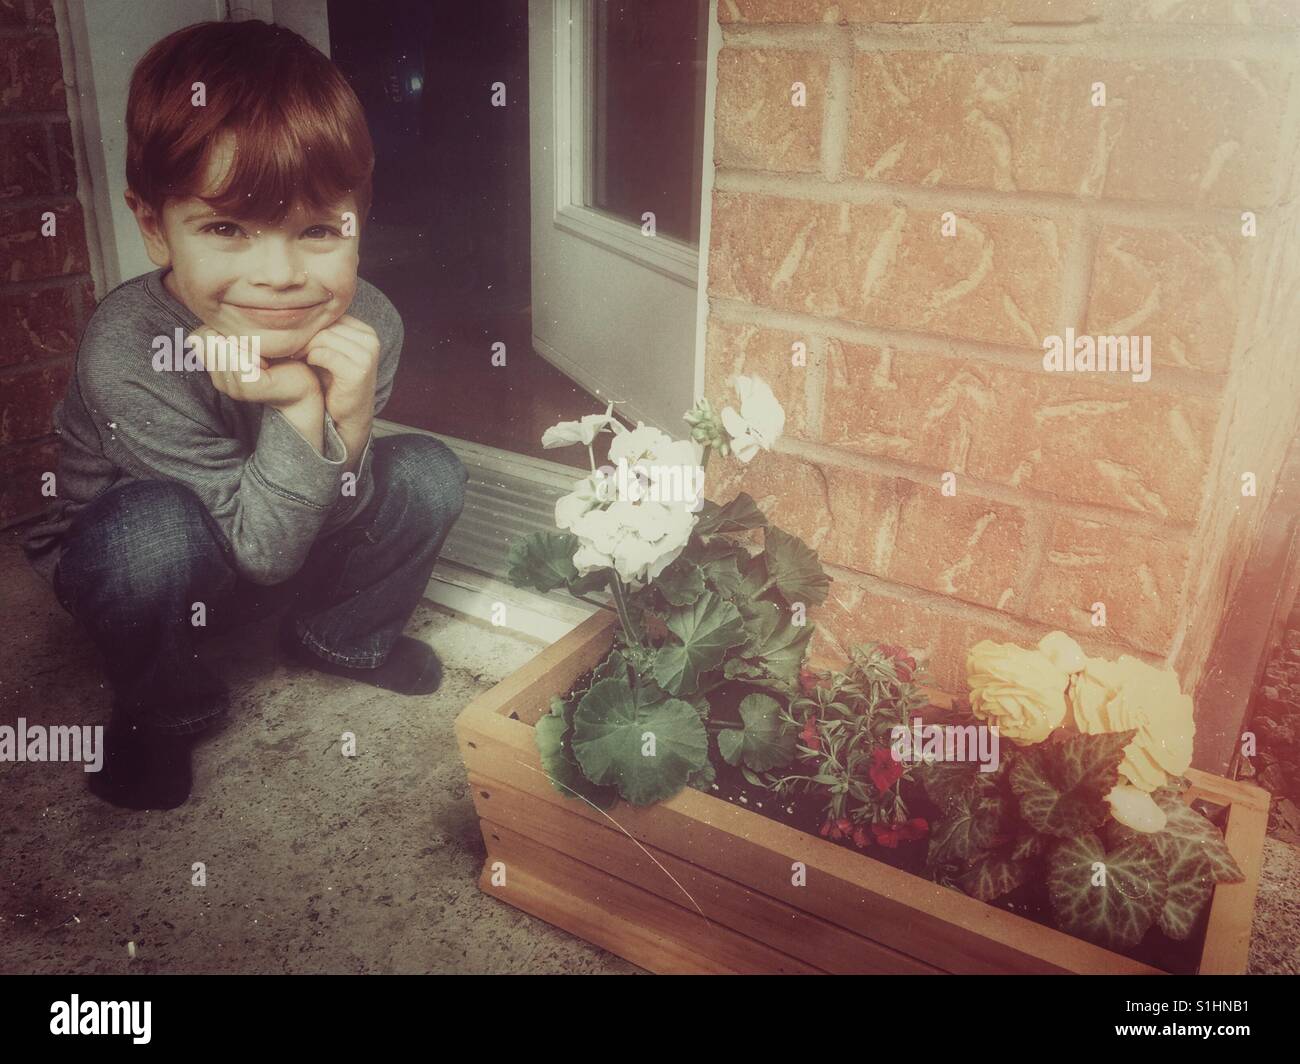 Young boy showing gift of Mother's Day flowers Stock Photo